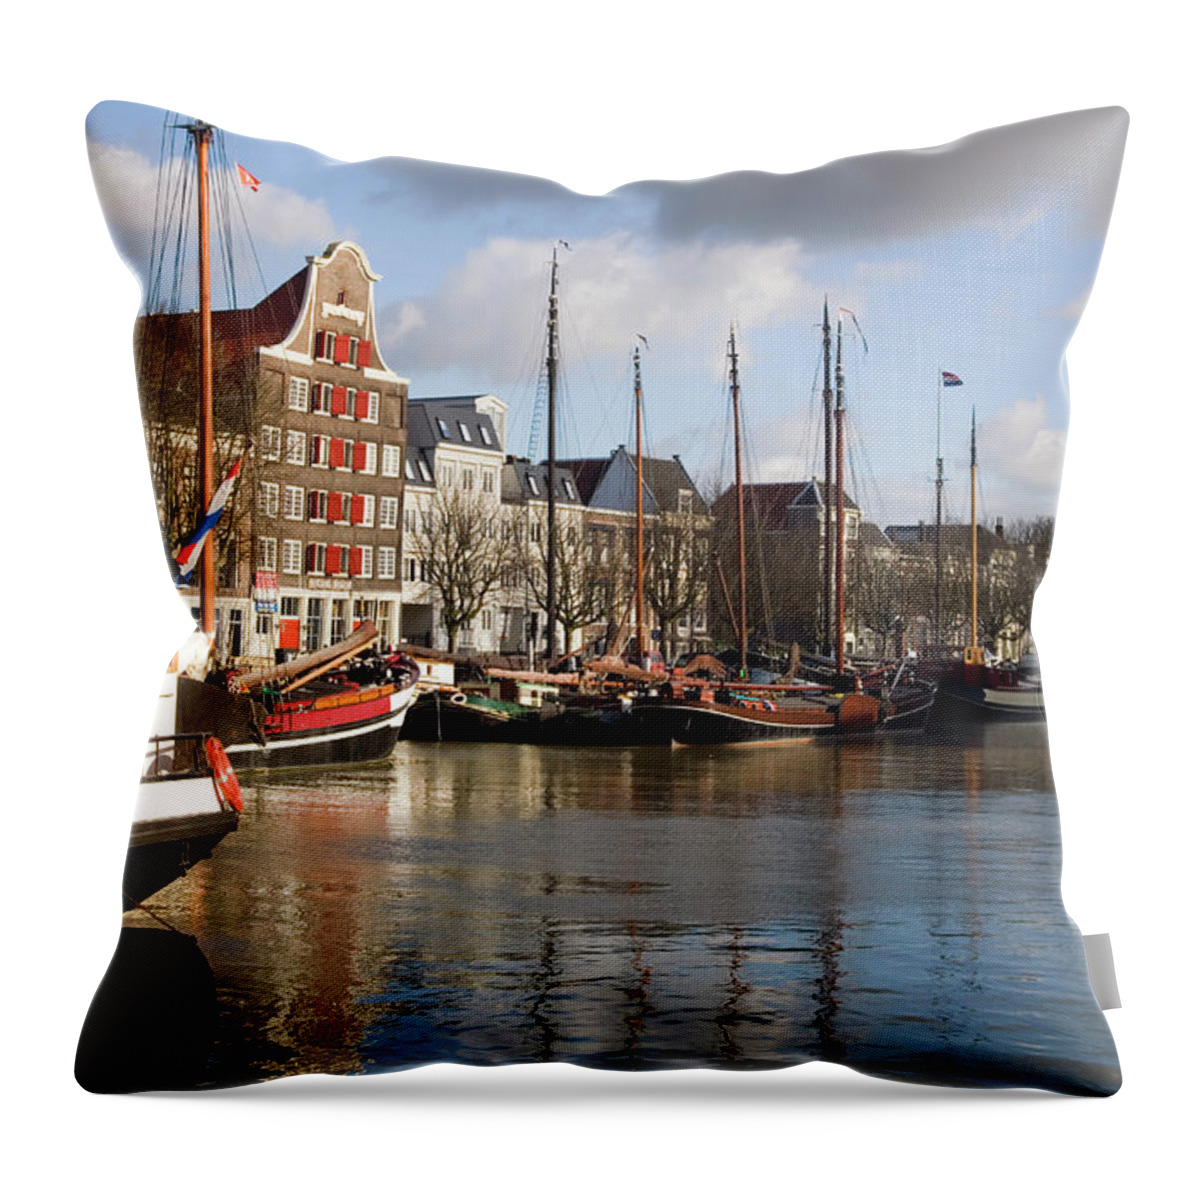 Netherlands Throw Pillow featuring the photograph Medieval Harbour With Traditional Ships by Roel Meijer